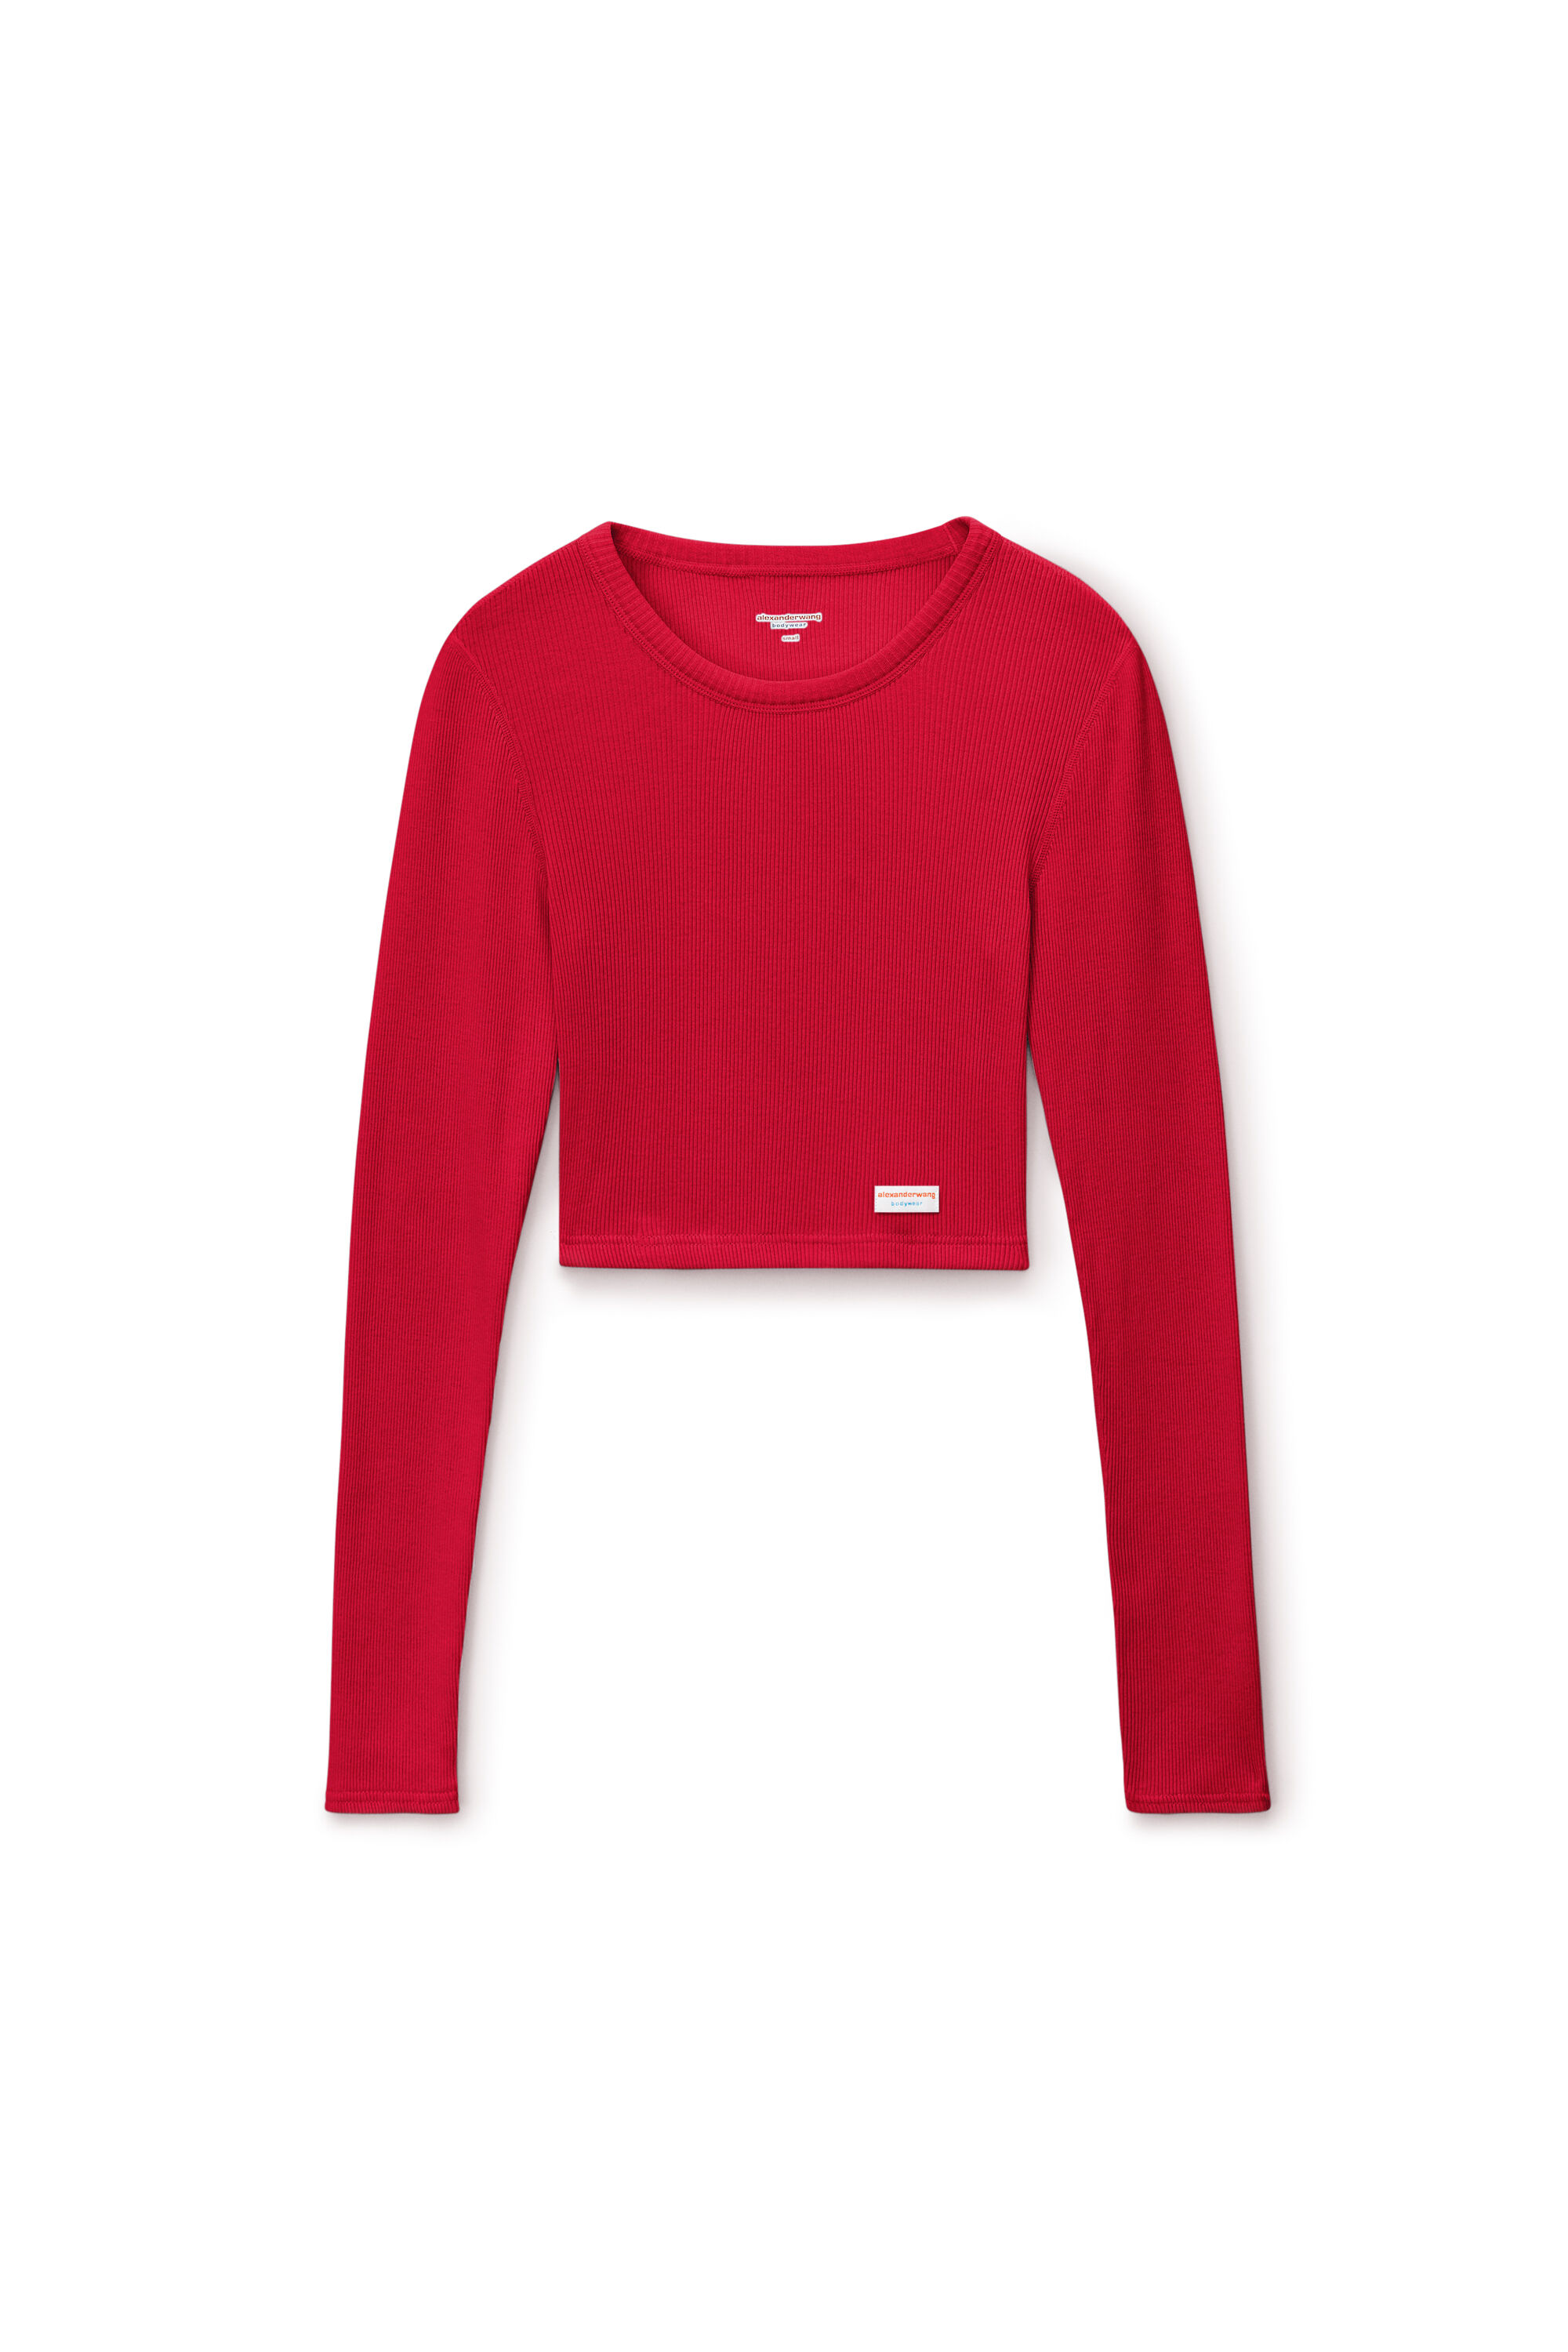 alexanderwang Cropped Long-Sleeve Tee in Ribbed Cotton Jersey 